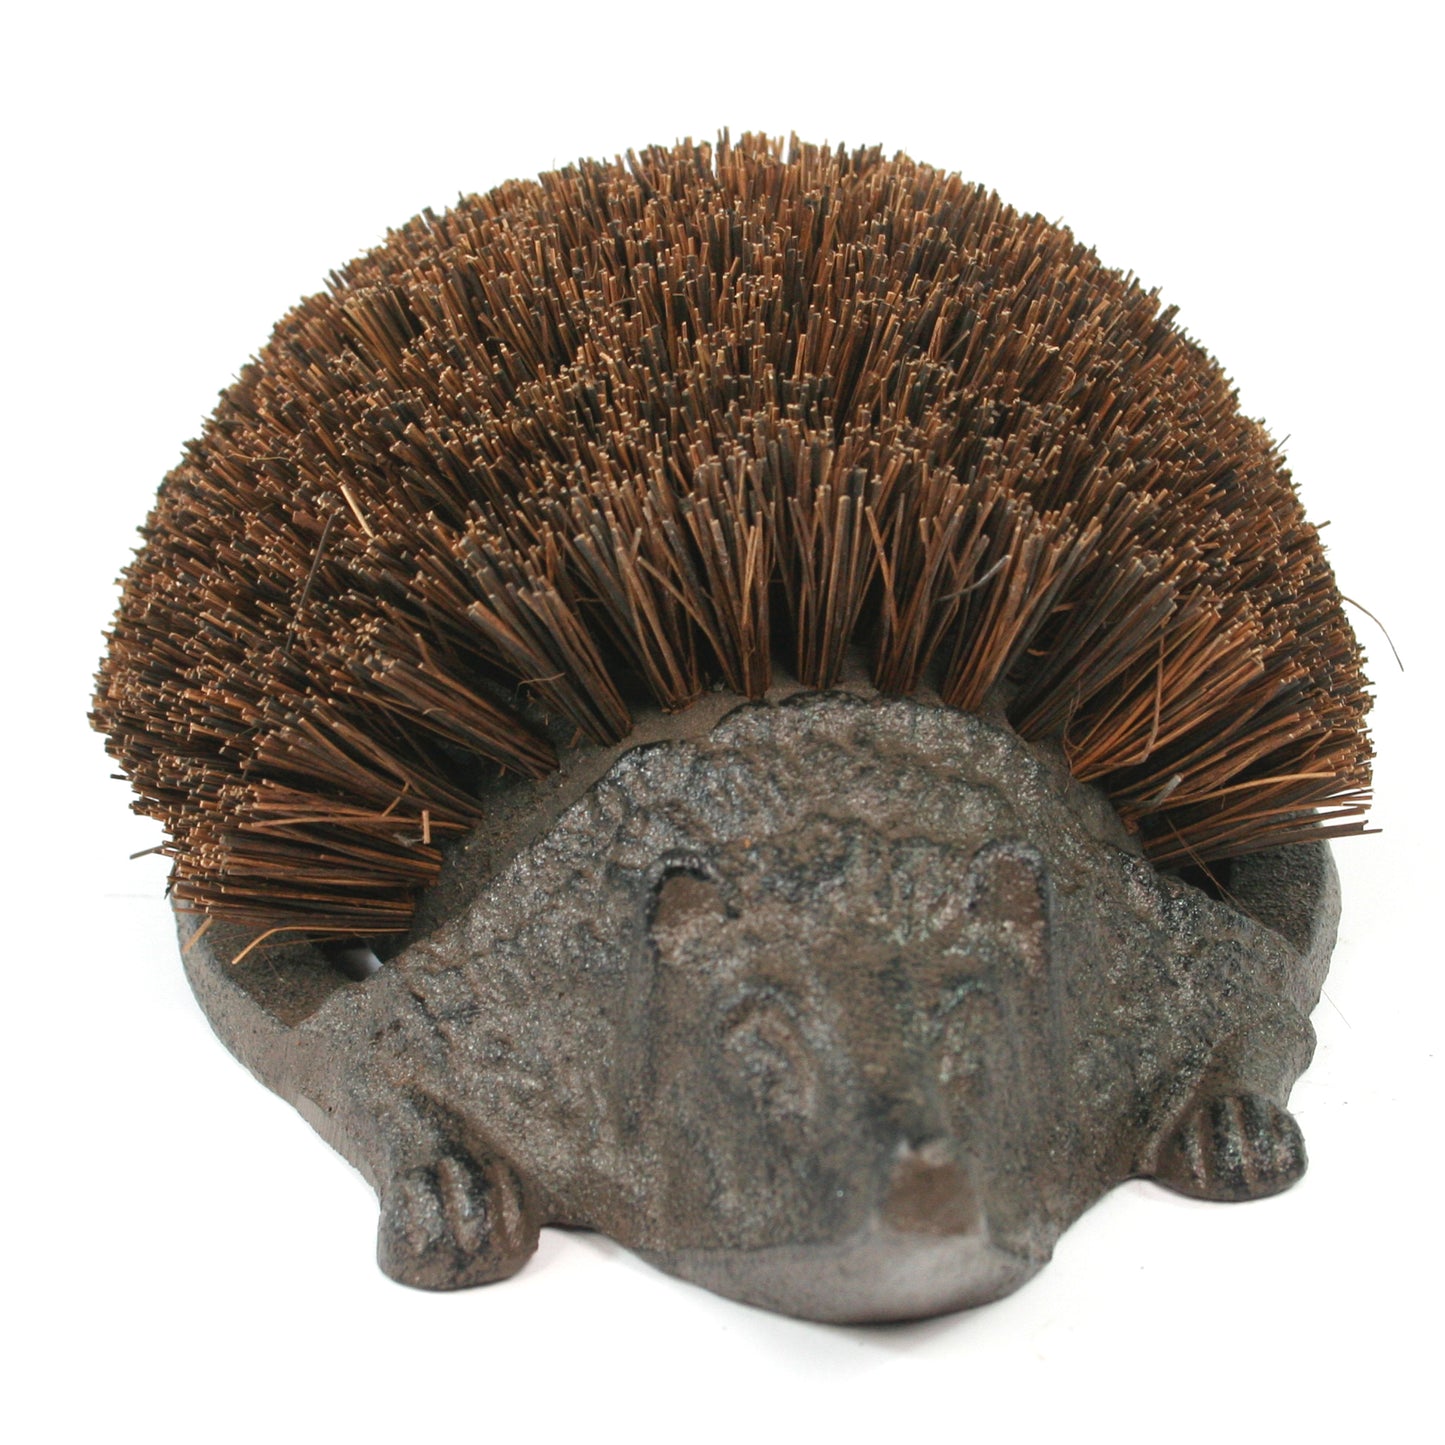 Cast Iron heavy duty boot brush & boot scraper in a hedgehog design. Perfect for wellies, trainers, shoes and boots. Mud/dirt scraper